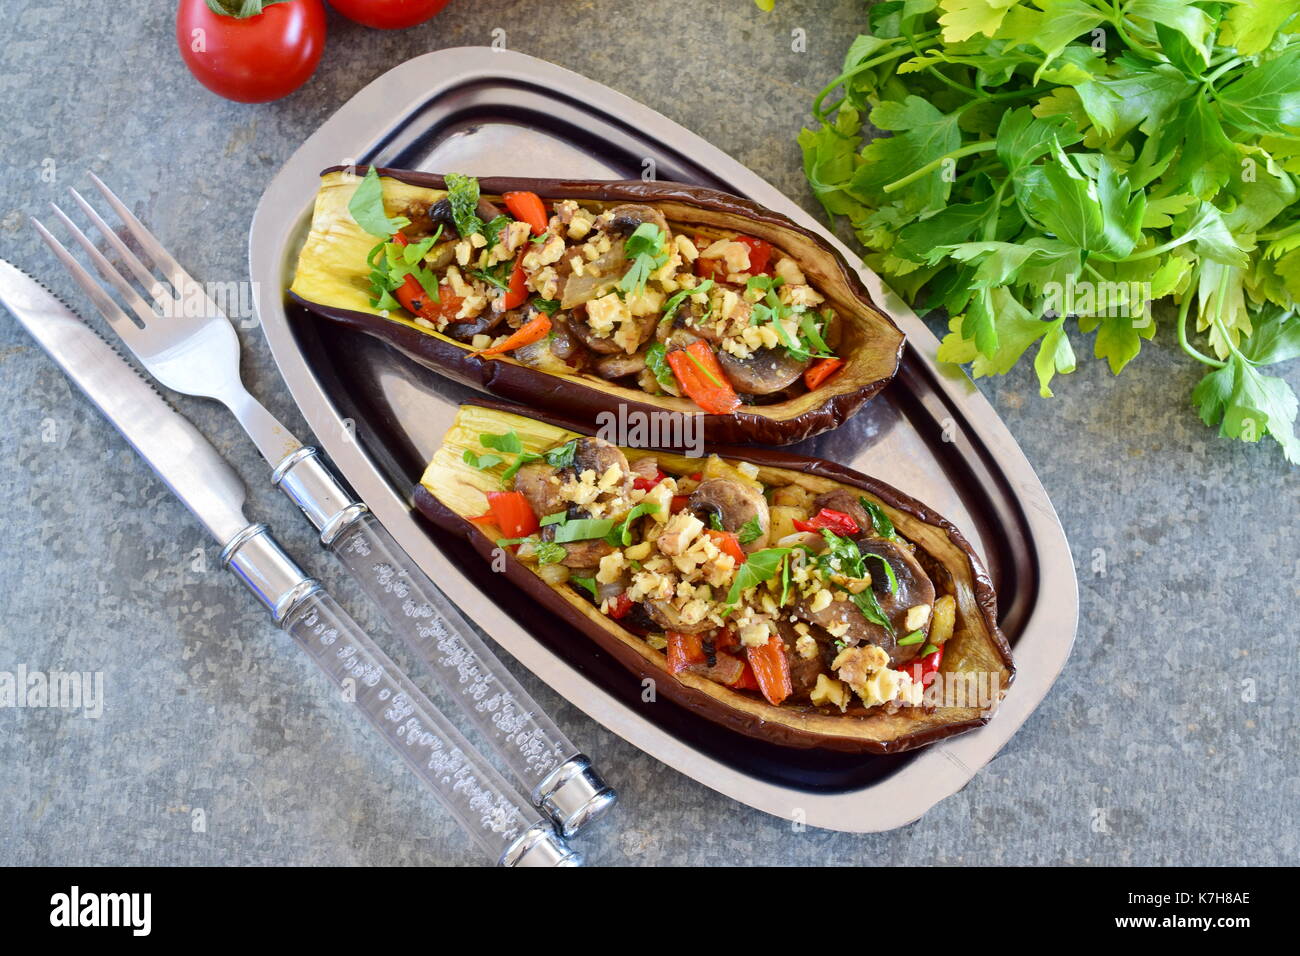 Eggplants stuffed with mushrooms, onions, carrots, tomatoes and nuts on a metal plate on a grey background. Vegetarian food. healthy eating concept. Stock Photo